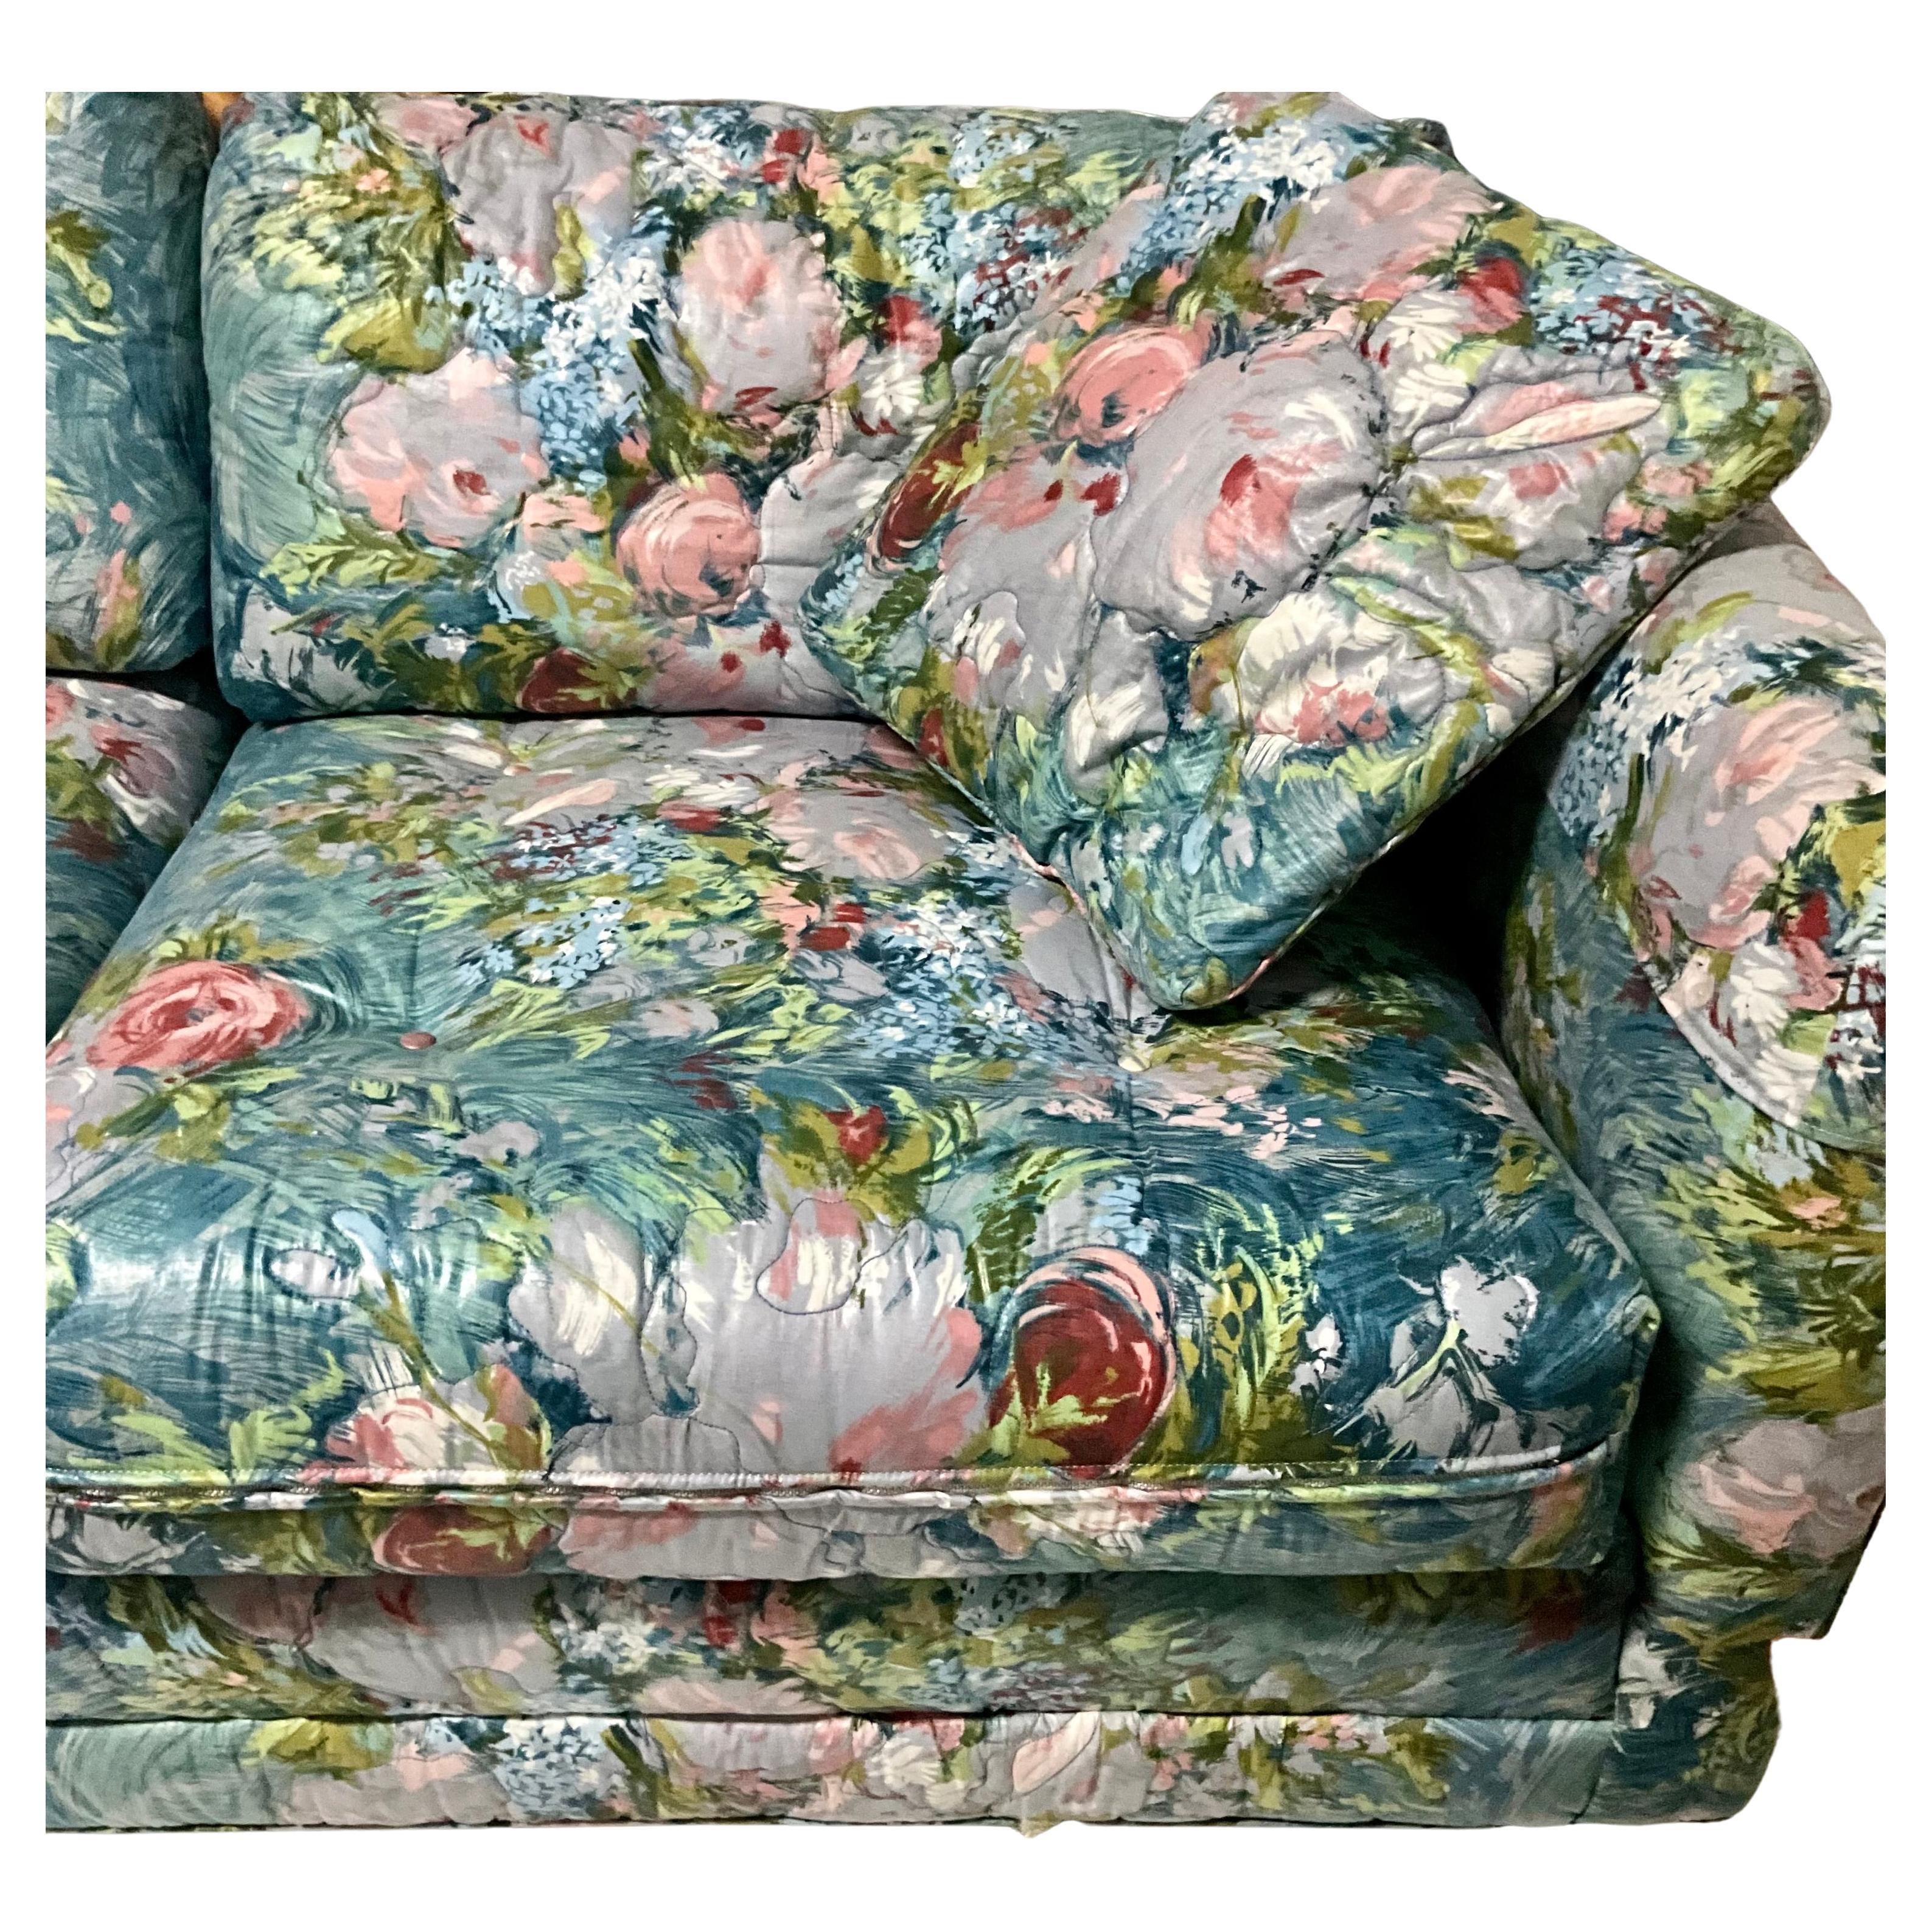 Larger modular sofa by Henredon with a cstunning chintz flowery fabric in blues greens, pinks and whites.  This piece has been kept in excellent vintage condition, barely used.  Can be put together in a variety of different ways.  Labels underneath